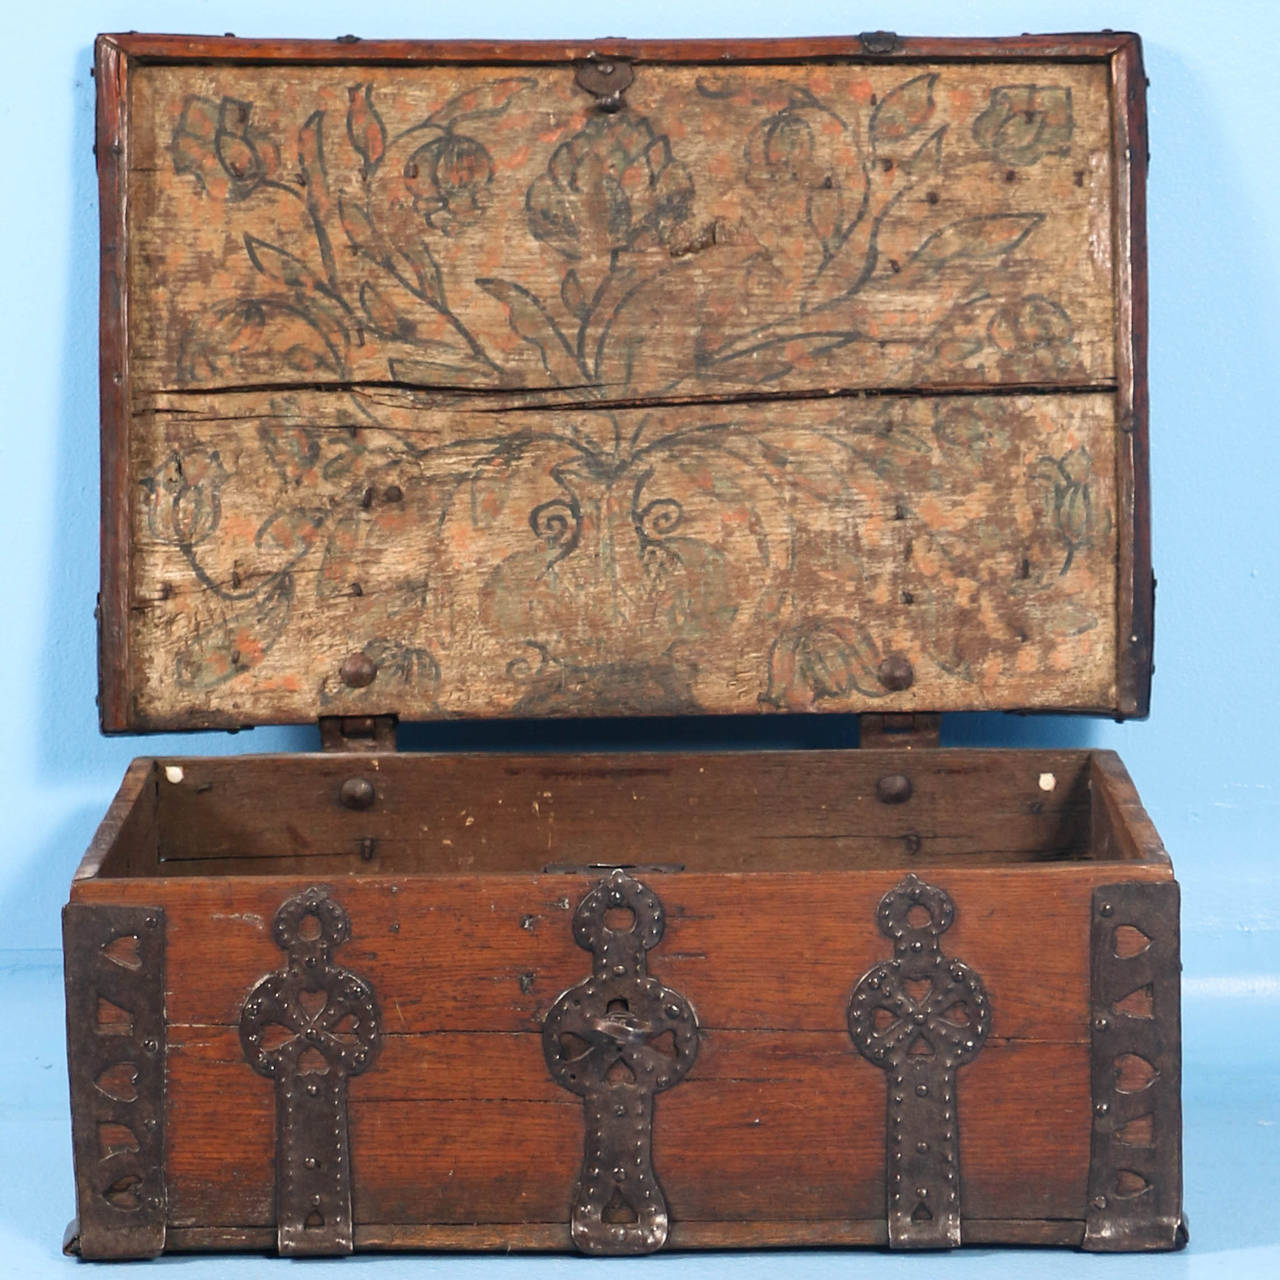 Swedish Small Antique Oak Money Chest Trunk with Wrought Iron Details, circa 1700